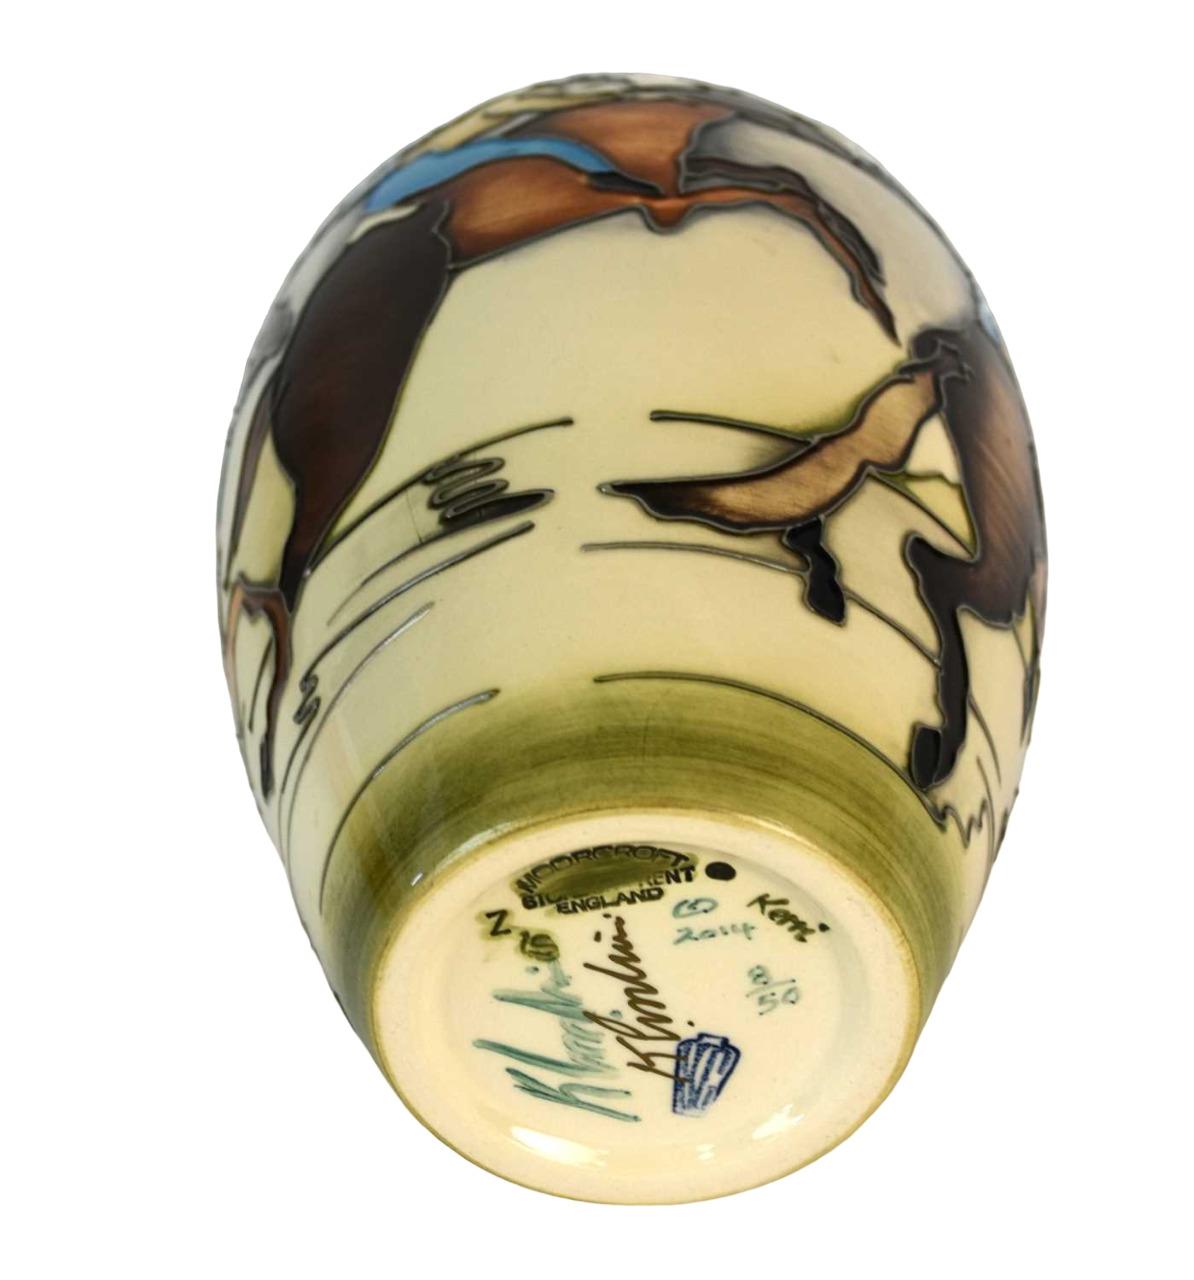 LIMITED EDITION Moorcroft Vase designed by Kerry Goodwin. 
An incredible Art Pottery Vase with equestrian design. 
Decorated with figures on horseback with windmills beyond, numbered 5/50, dated 2015, signed both under and over the glaze by